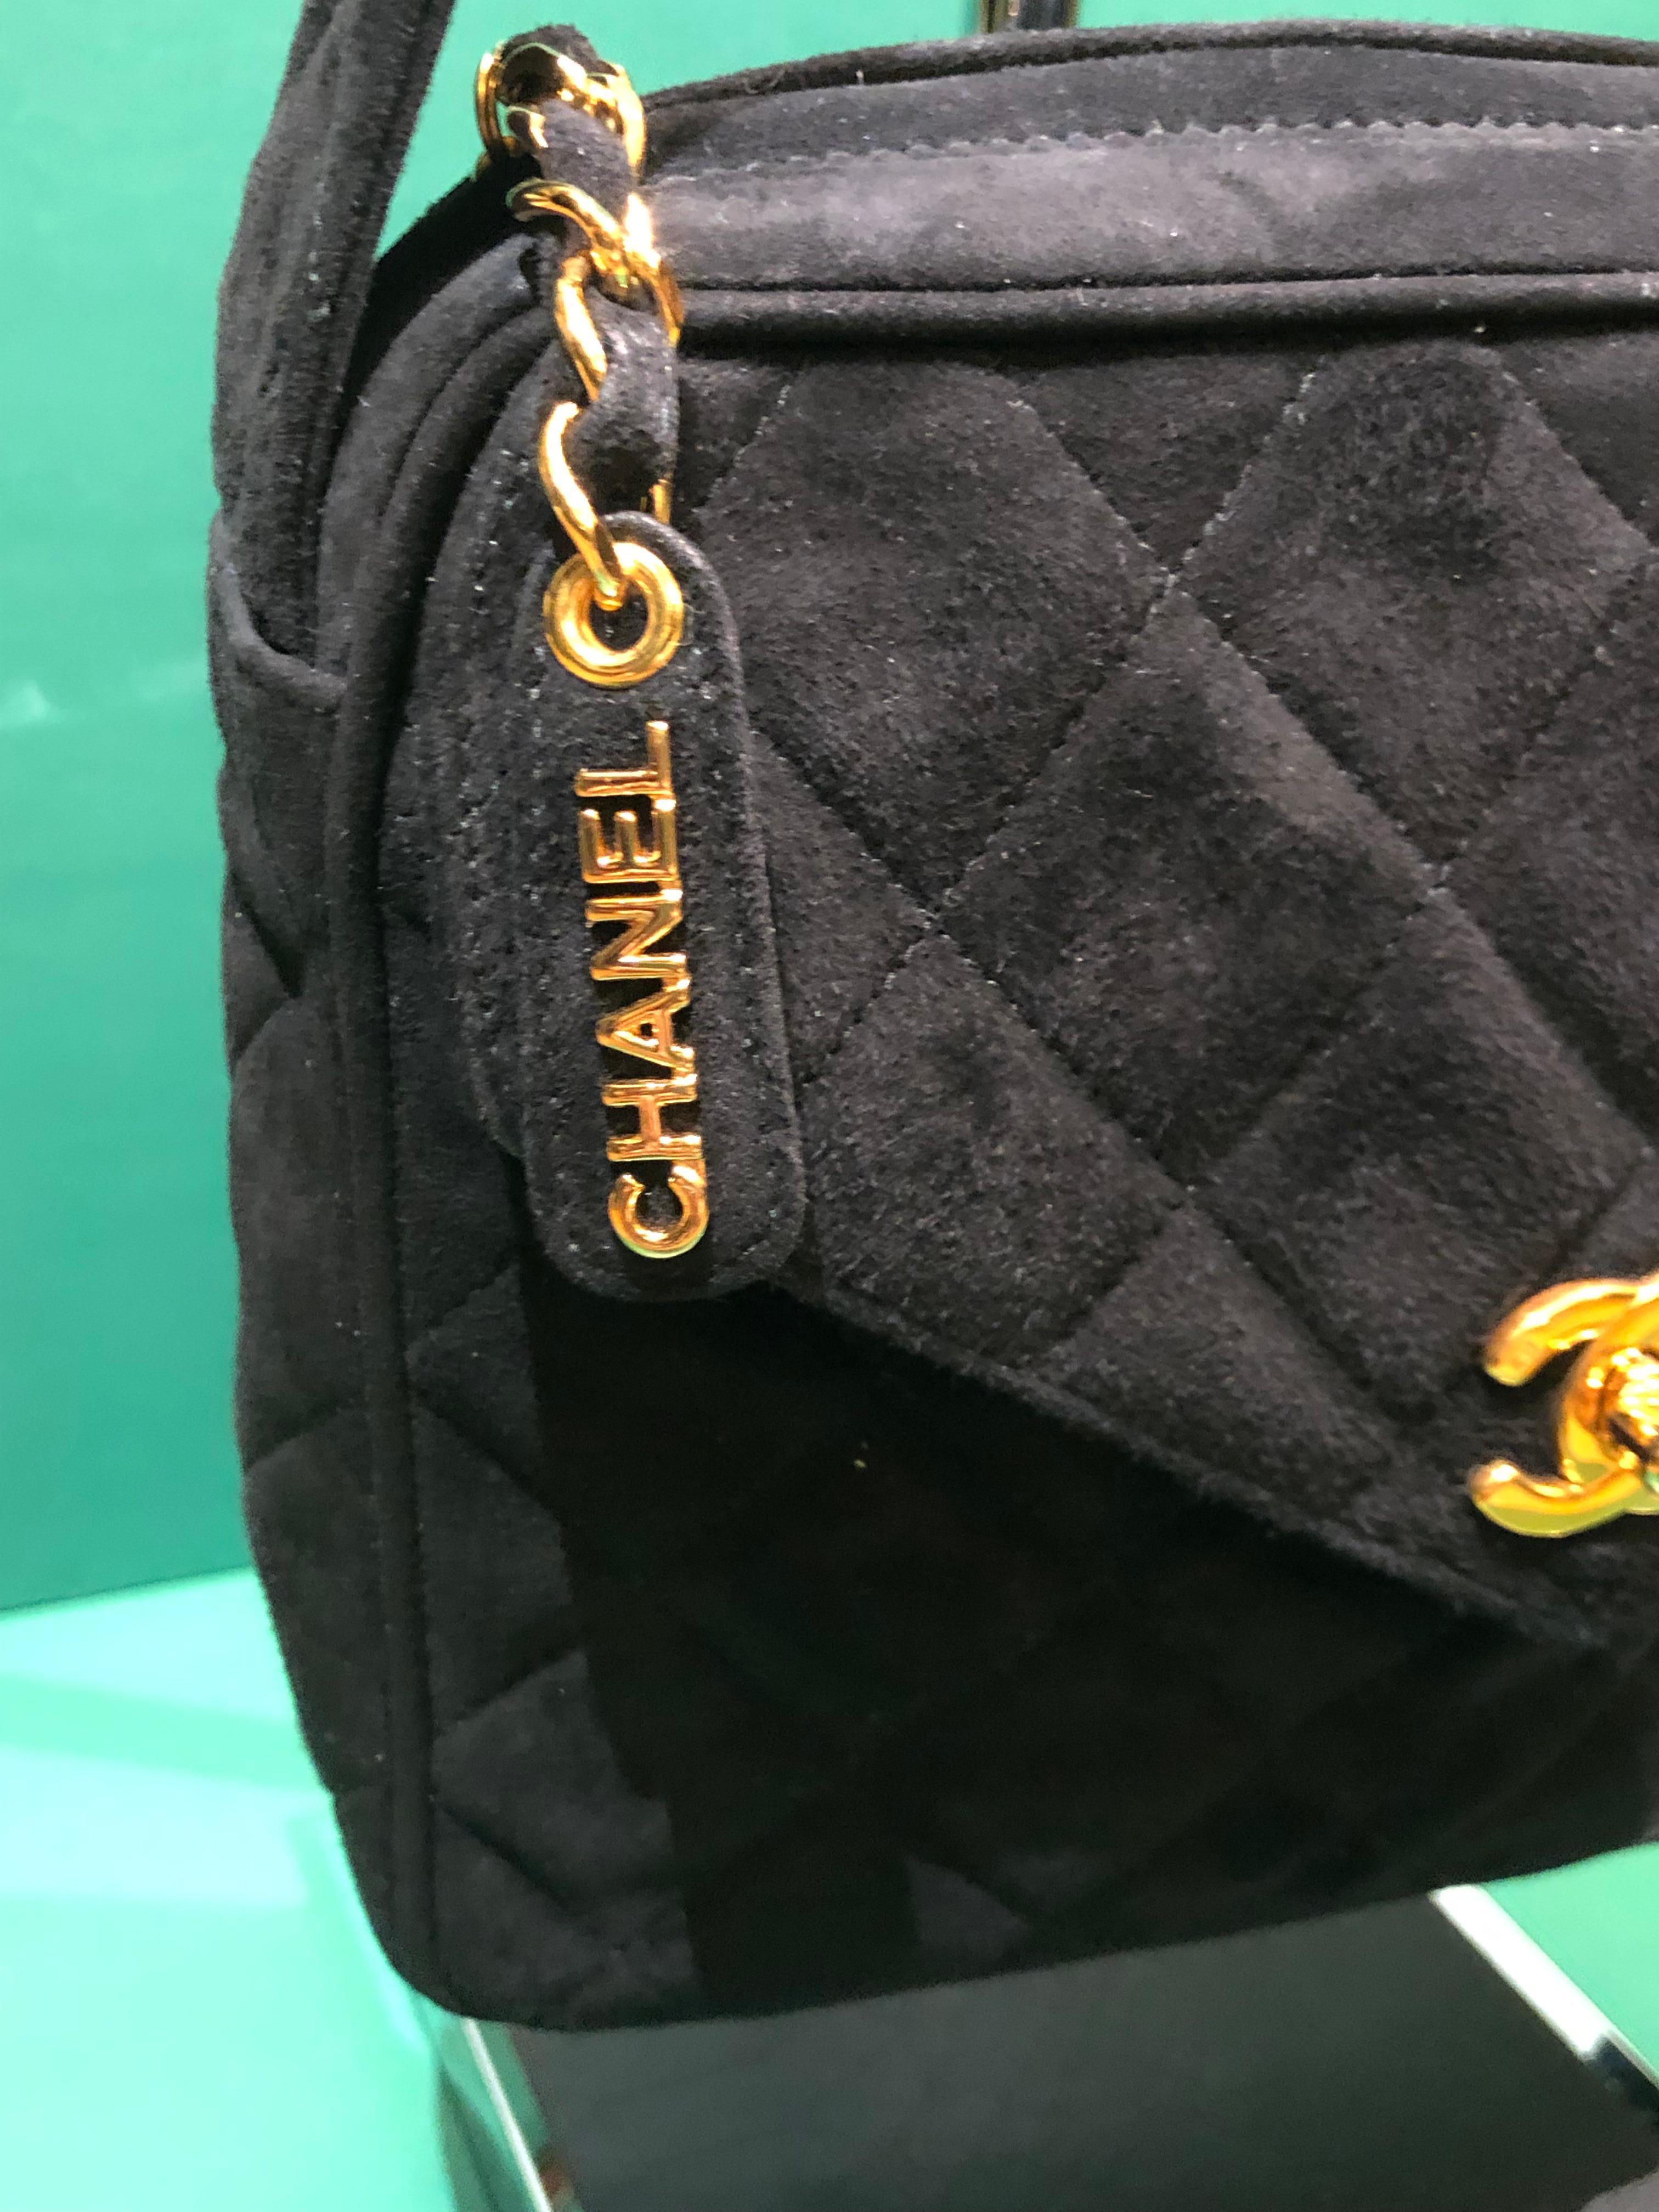 - Chanel black quilted suede leather handle handbag from 1994 to 1996. 

- 